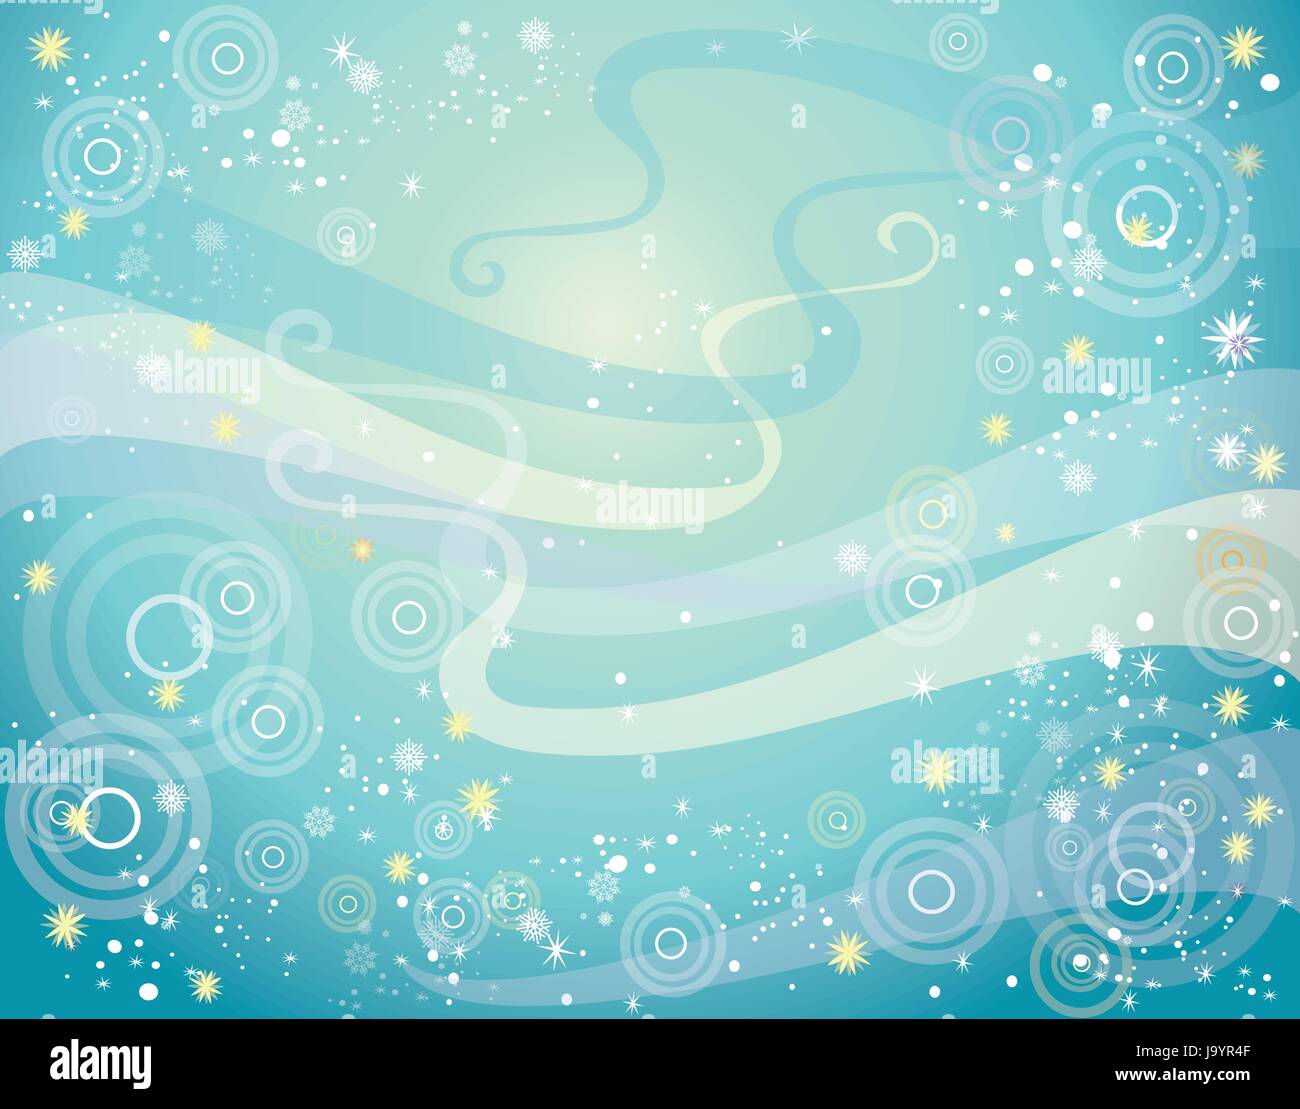 Turquoise vector background with circles, snowflakes and flowers Stock Vector